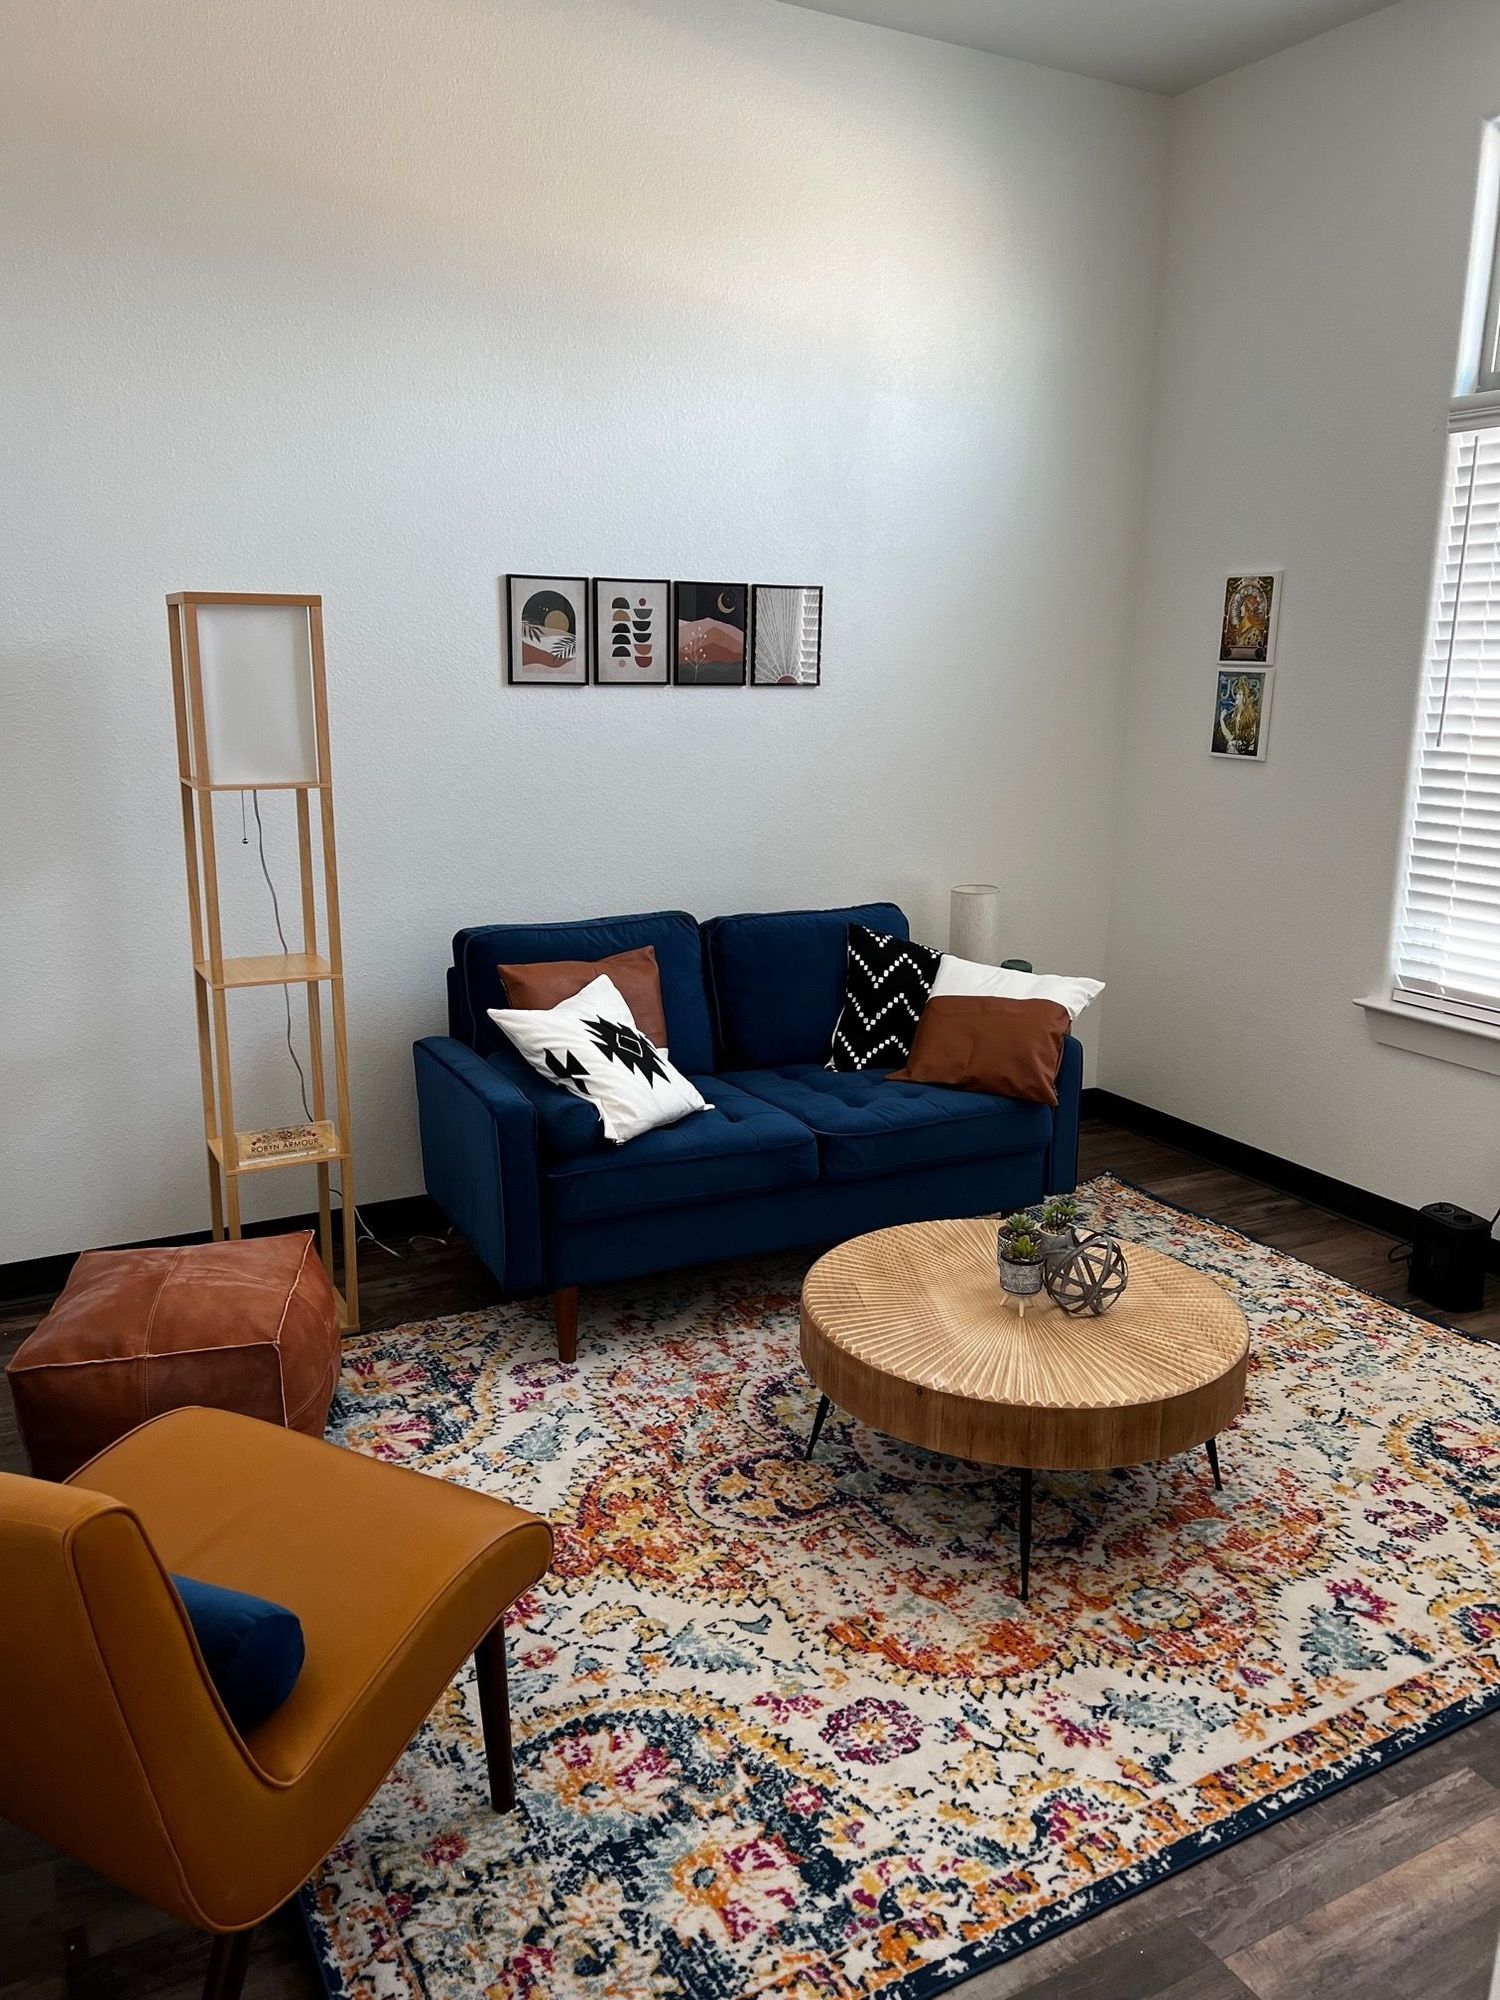 Gallery Photo of quiet and calming therapy room